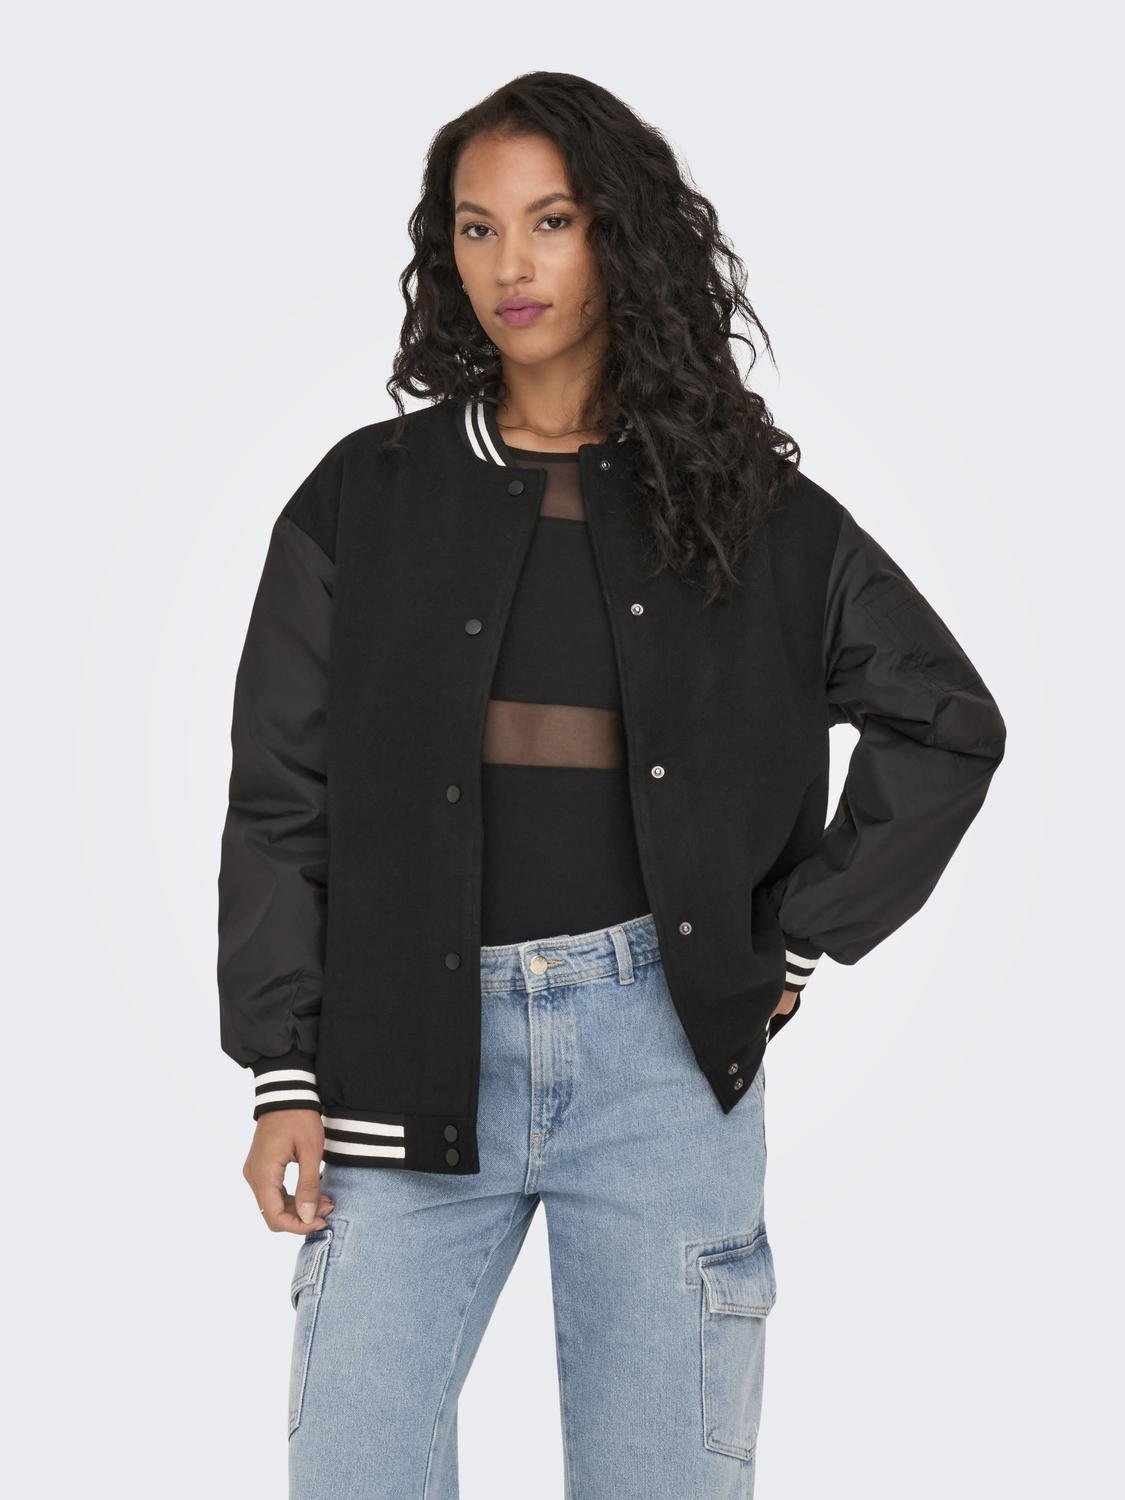 ONLY O-Neck Ribbed cuffs Otw Bomber -Black - 15292678